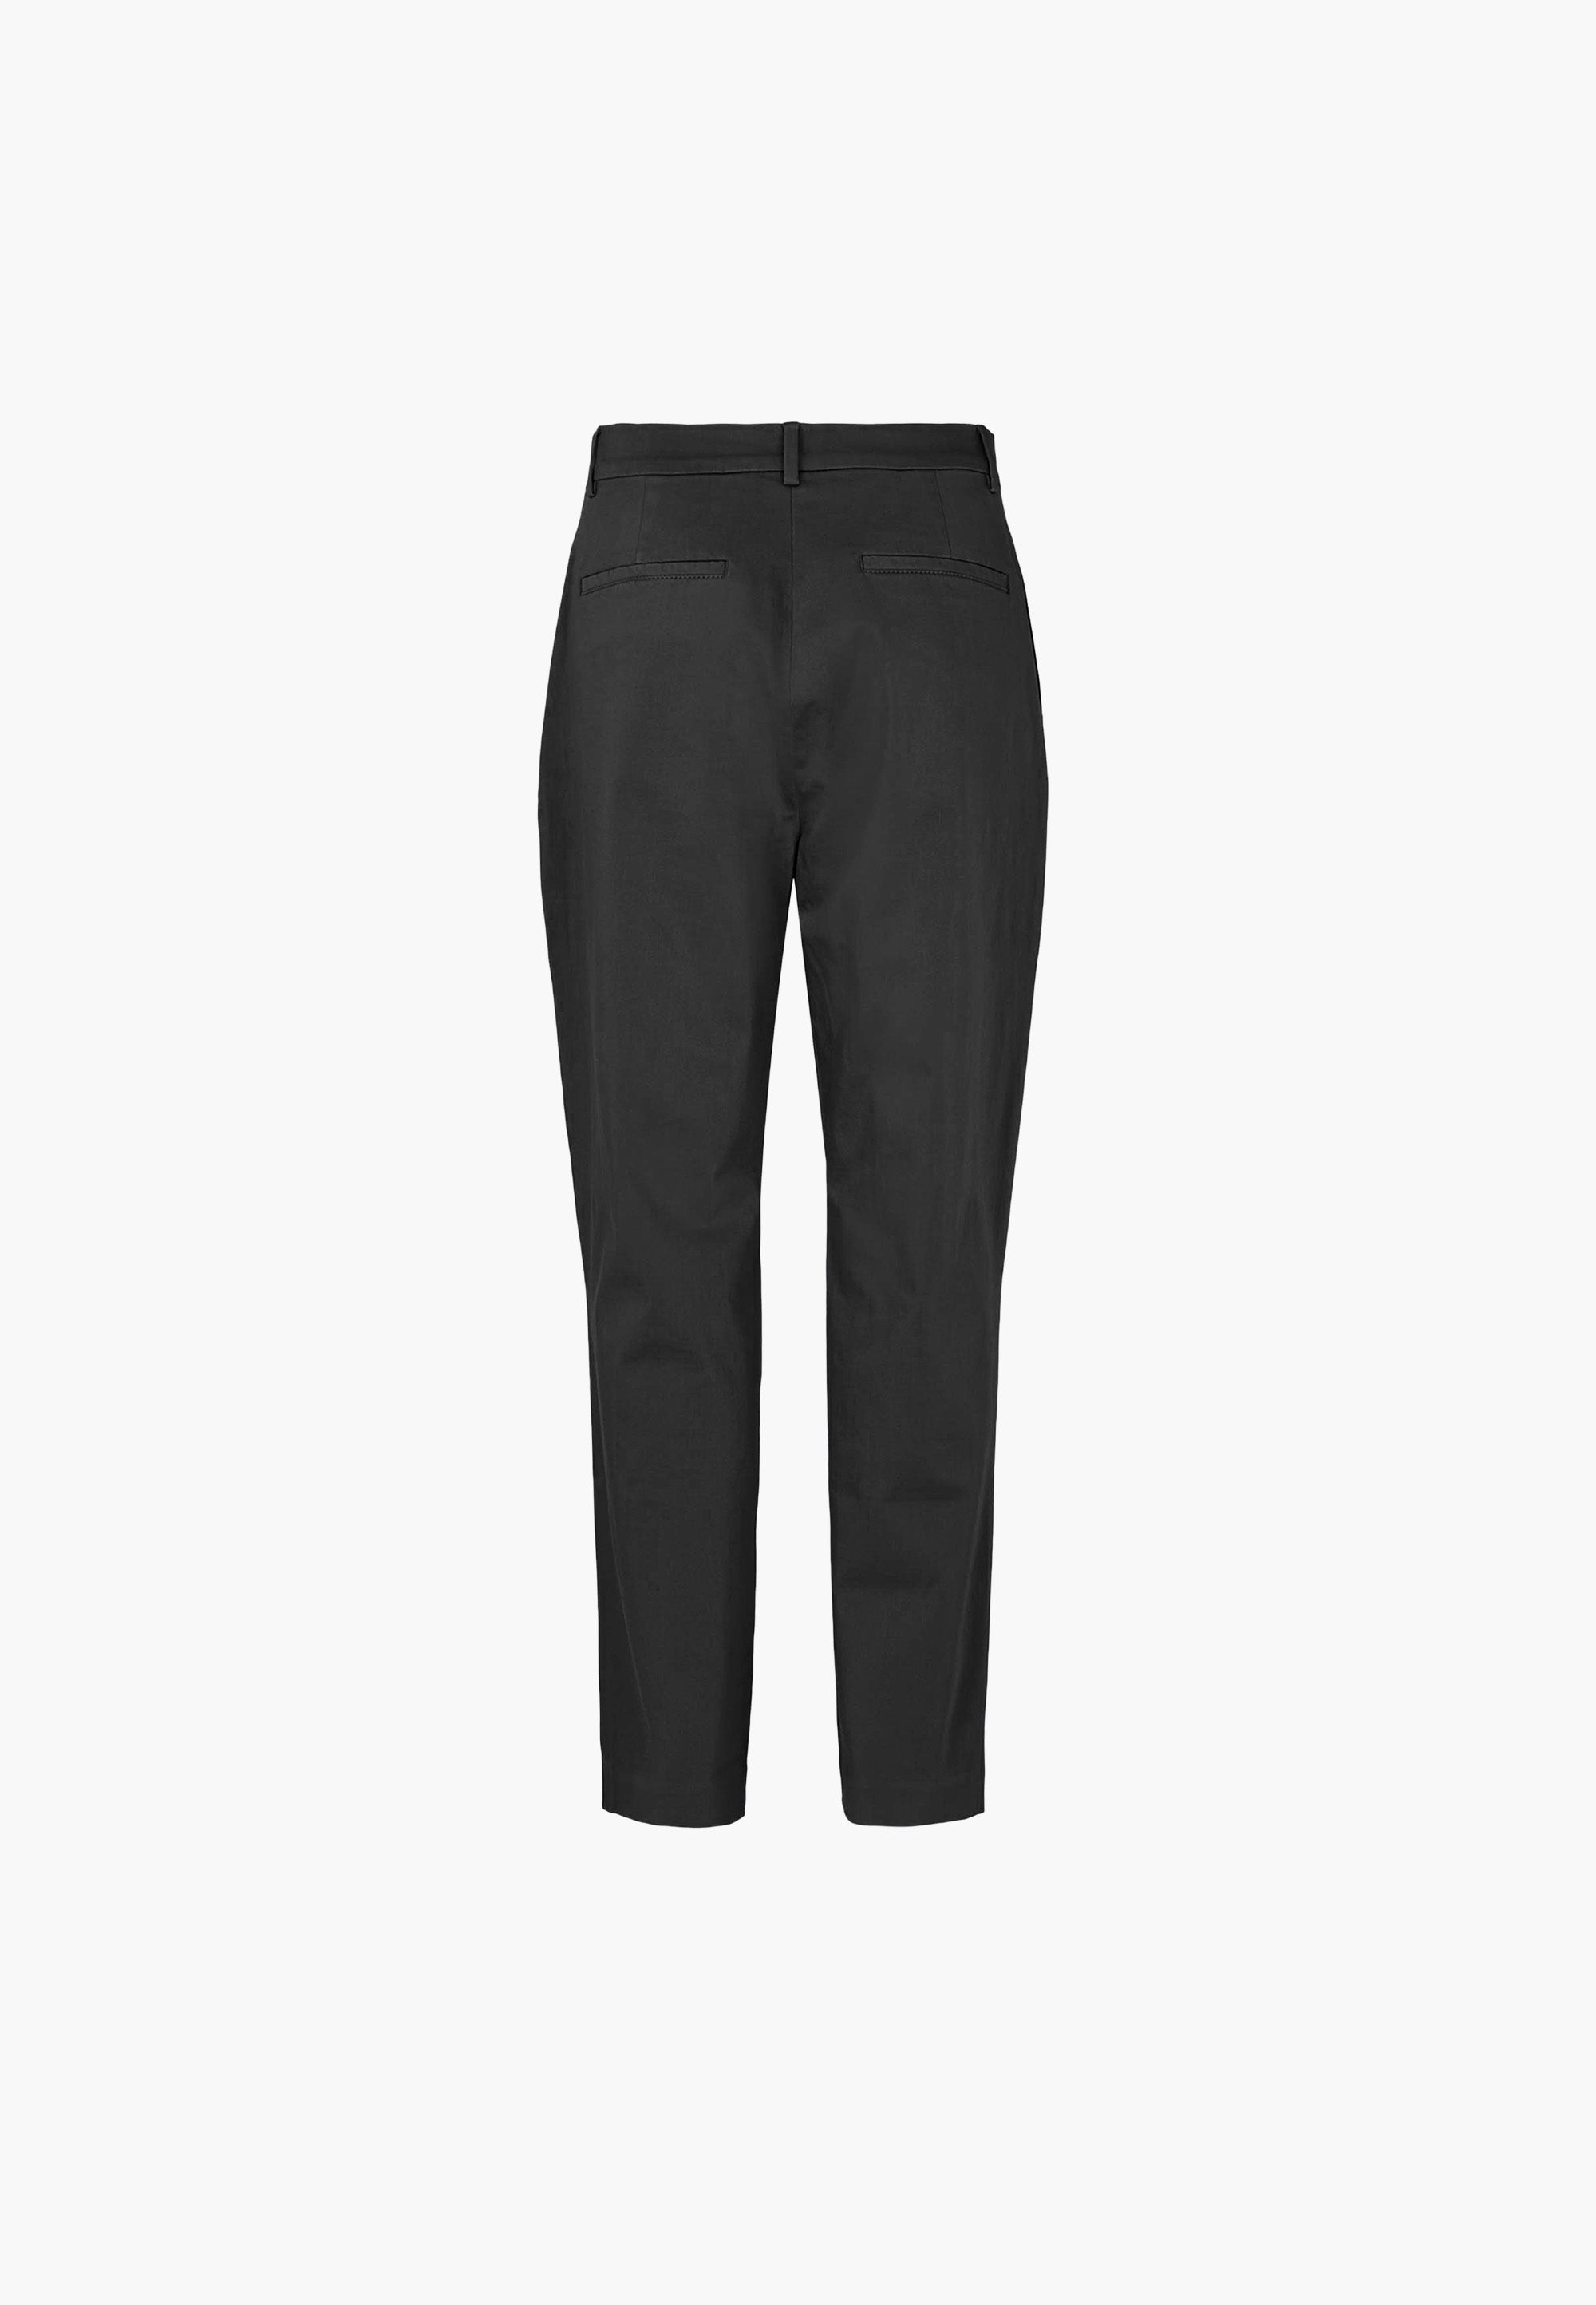 LAURIE  Noa Relaxed - Medium Length Trousers RELAXED 99000 Black